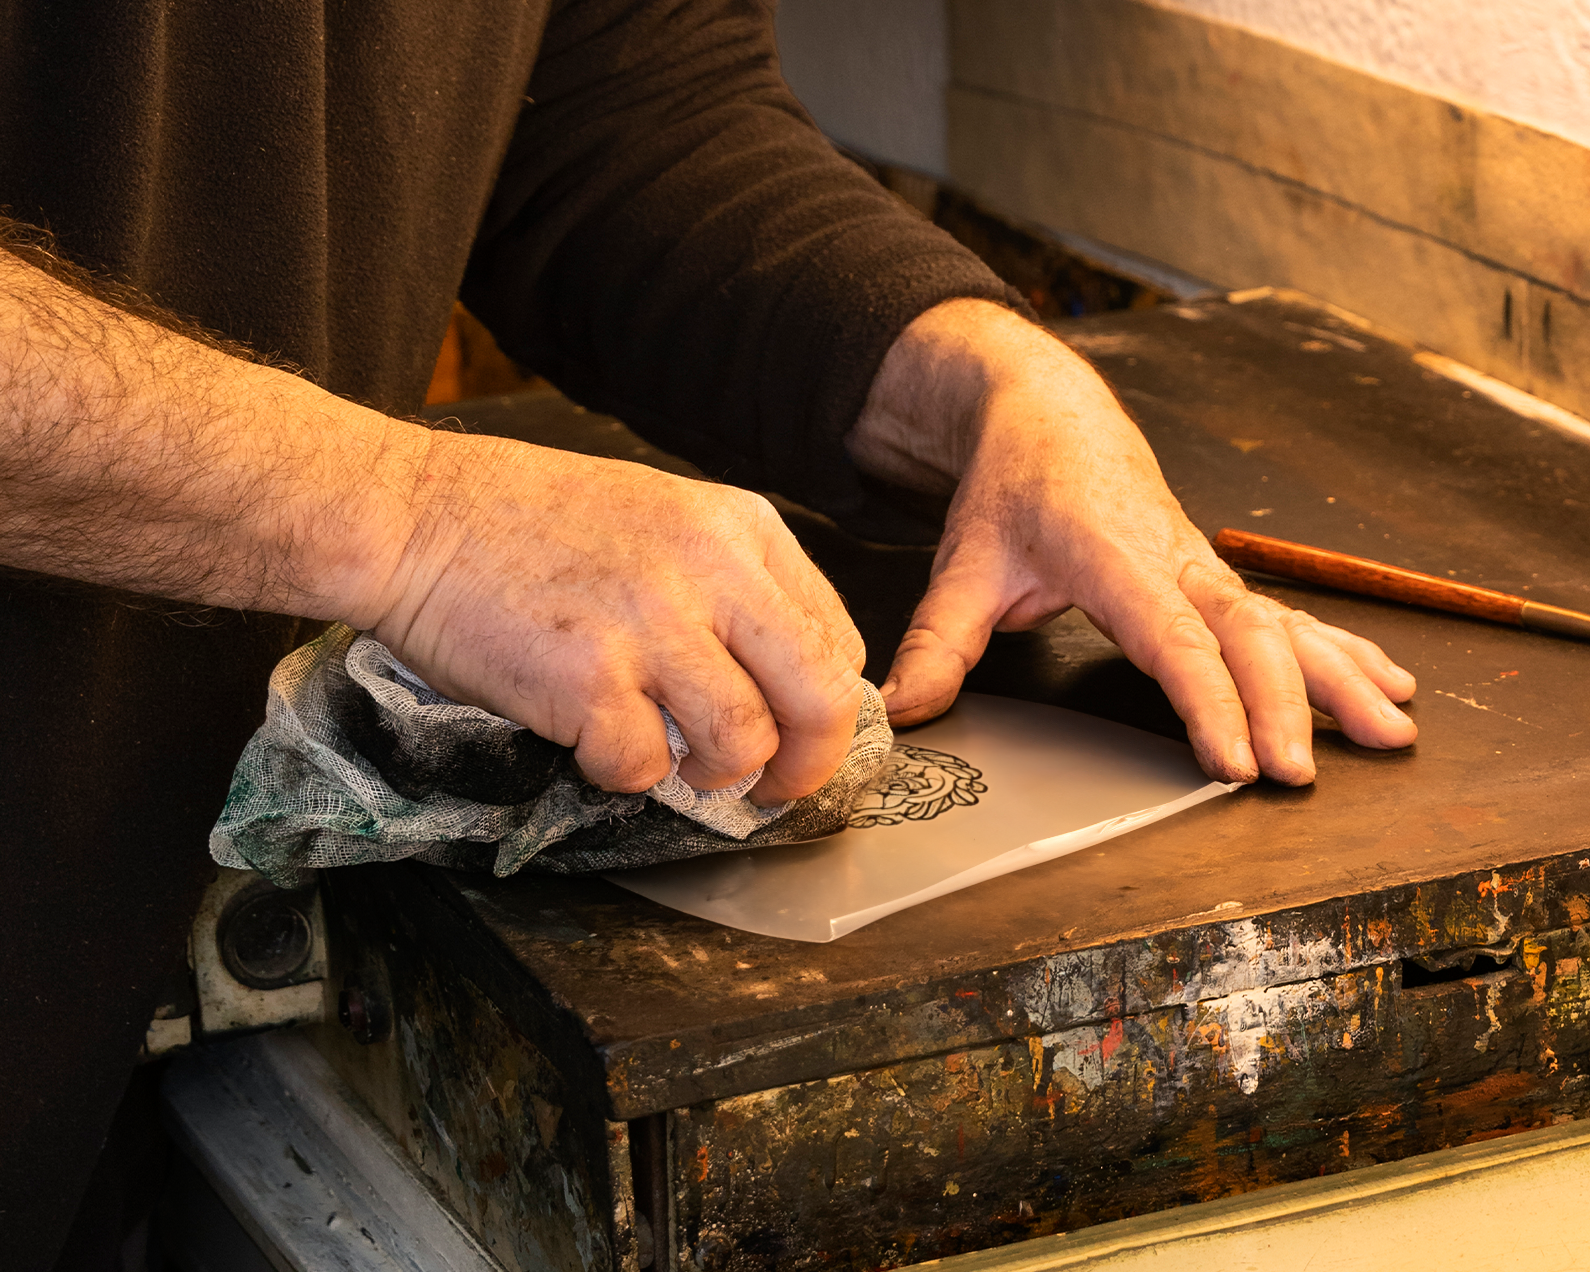 An image of a person inking up an acetate engraved plate.